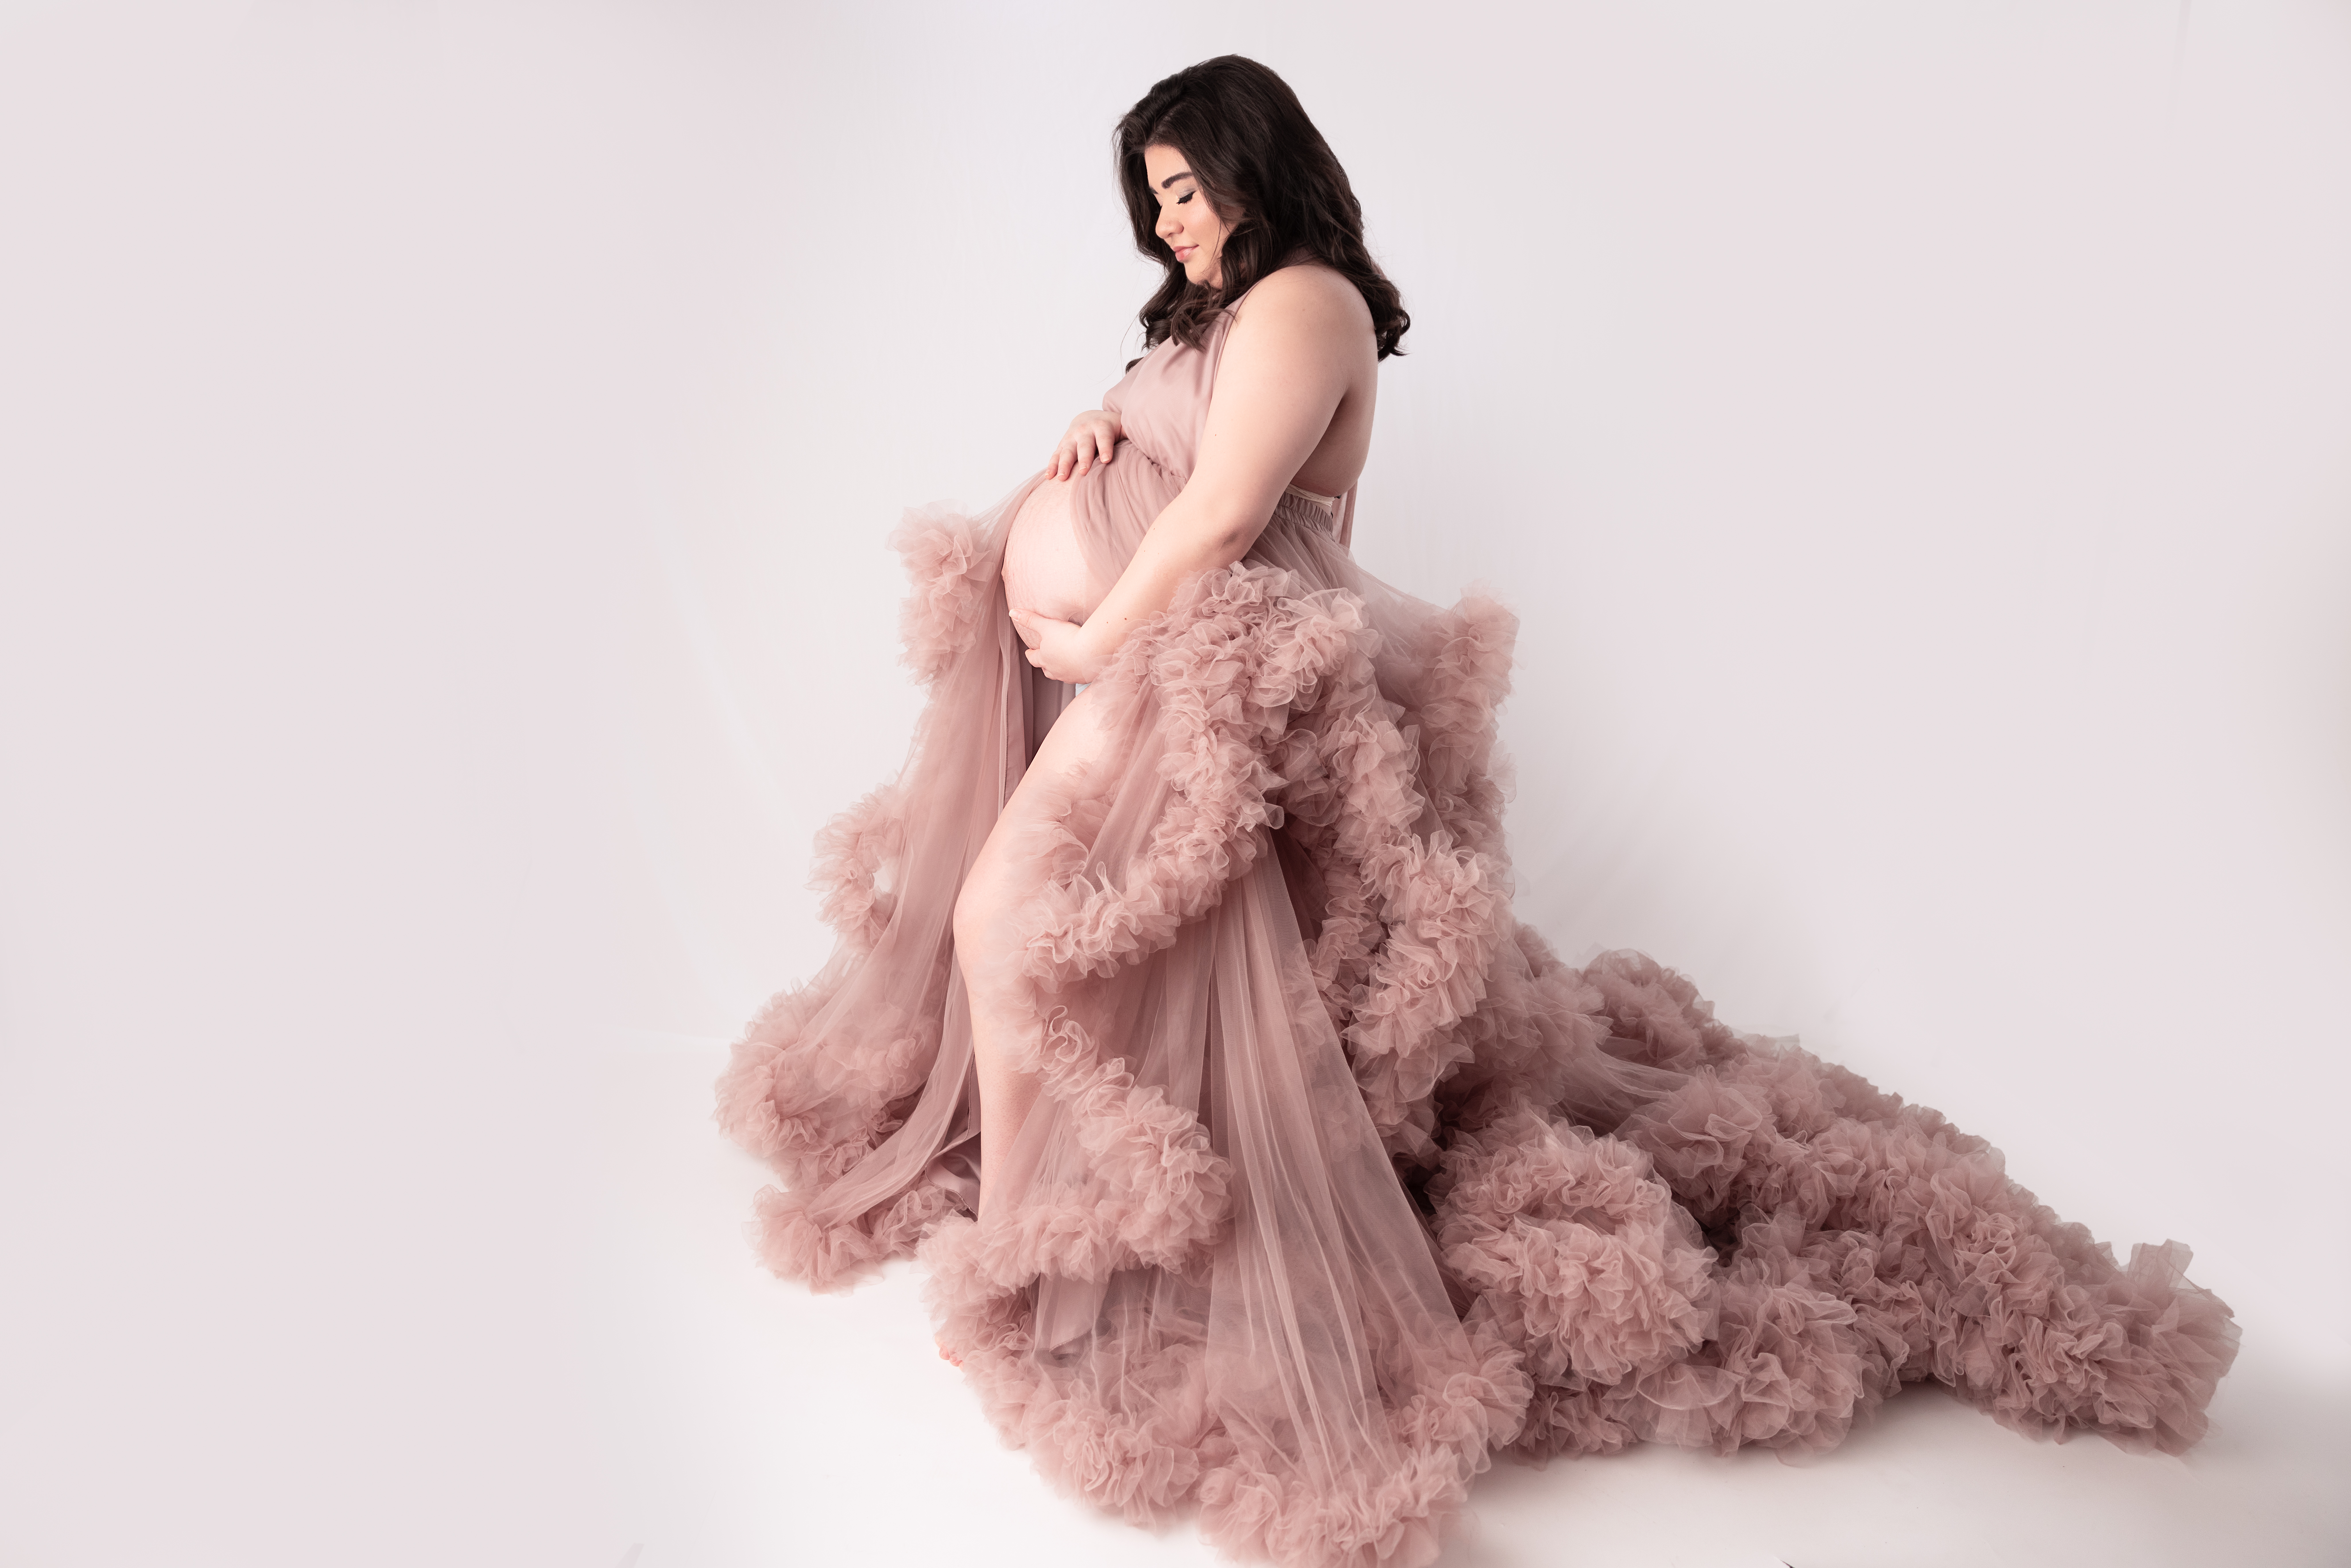 Side Profile of Woman Wearing a Pink Boutique Gown holding he pregnant belly